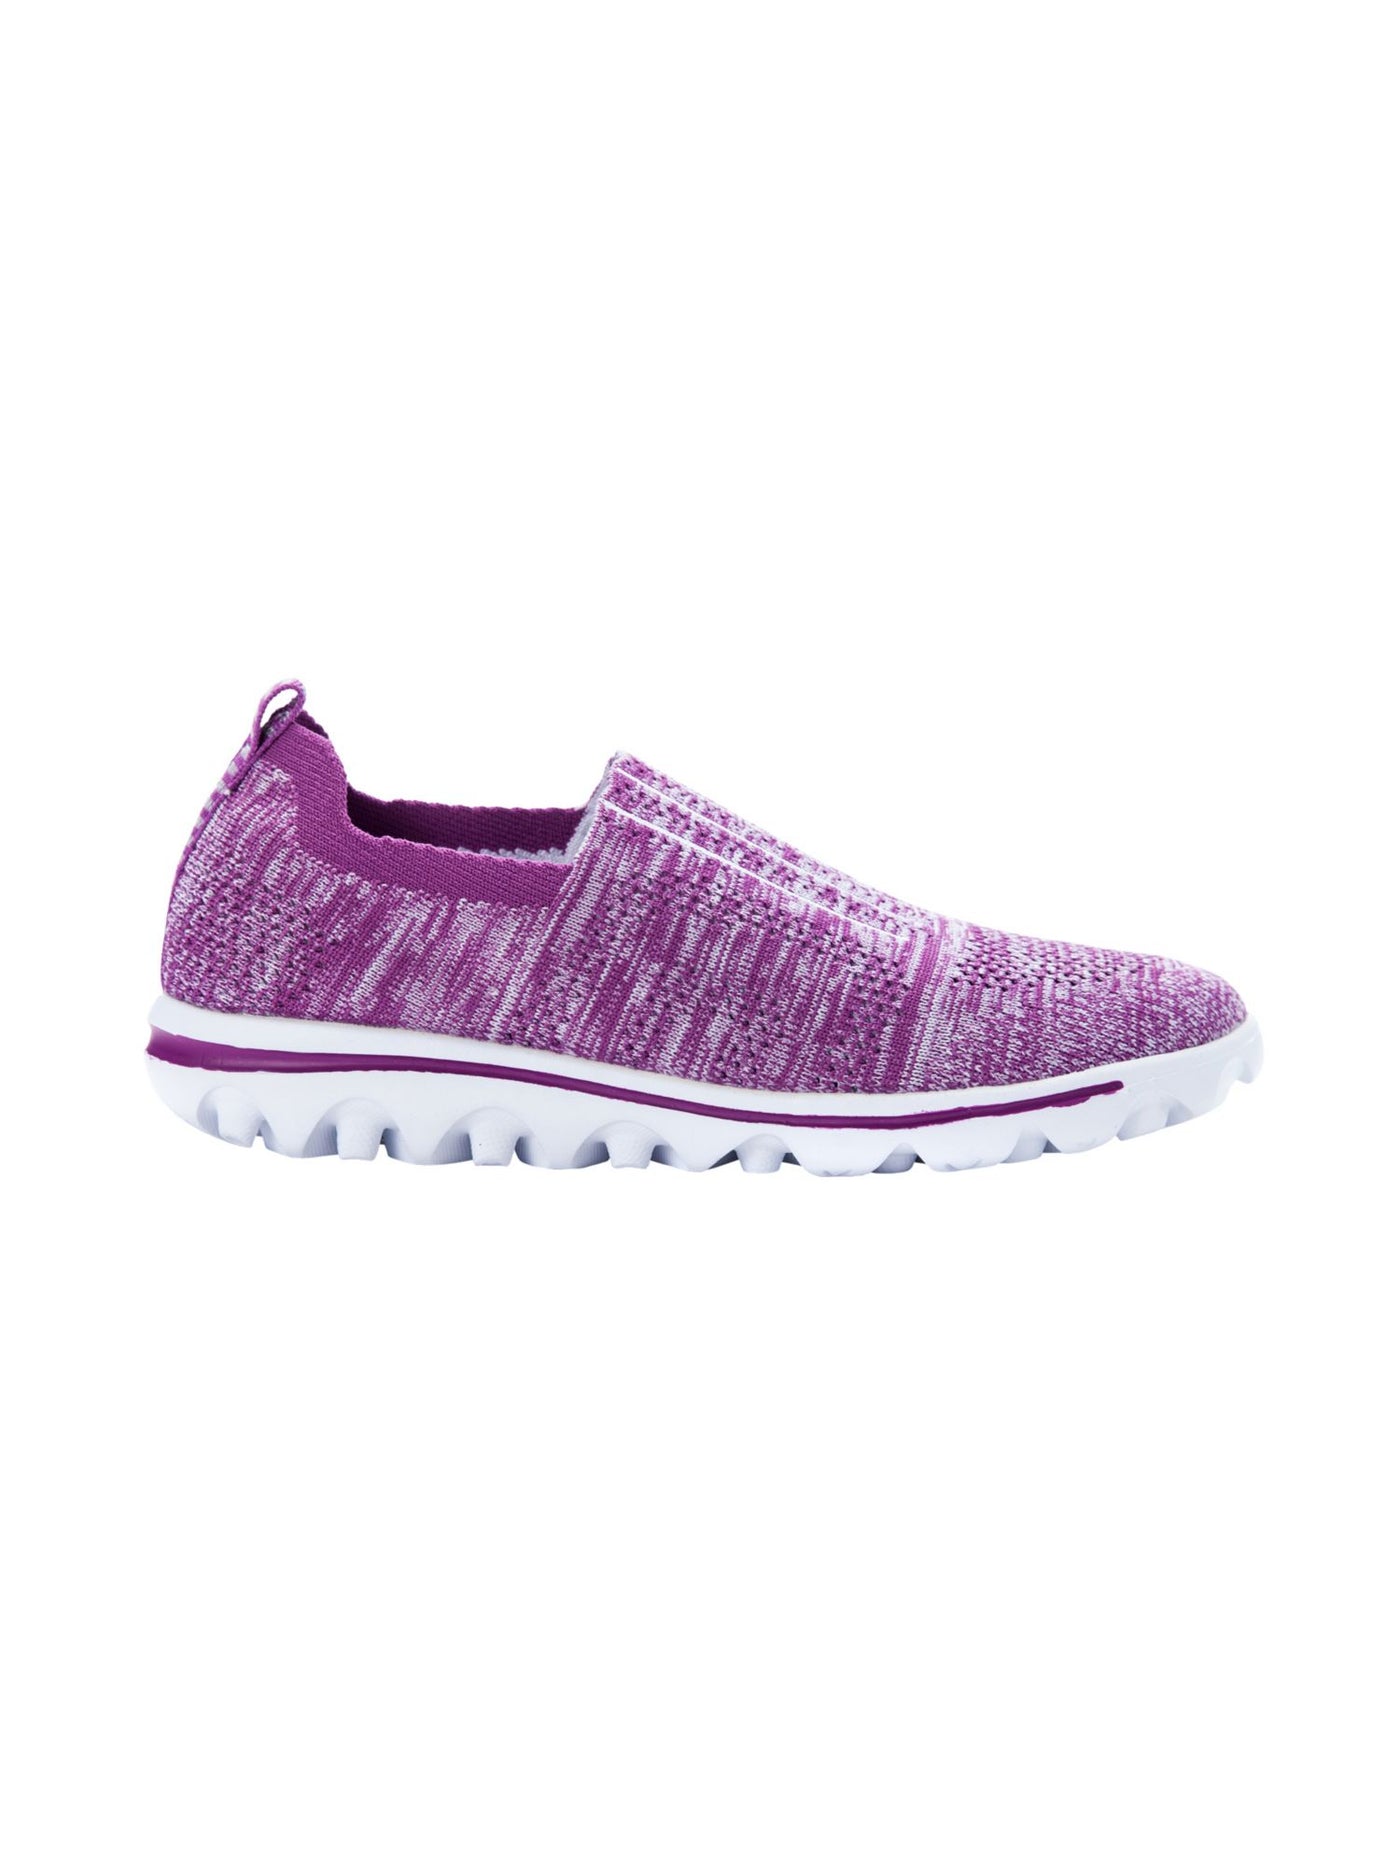 PROPET Womens Purple Mixed Knit Stretch Flex Heel Pull-Tab Cushioned Breathable Travelactiv Round Toe Wedge Slip On Sneakers Shoes 7.5 W